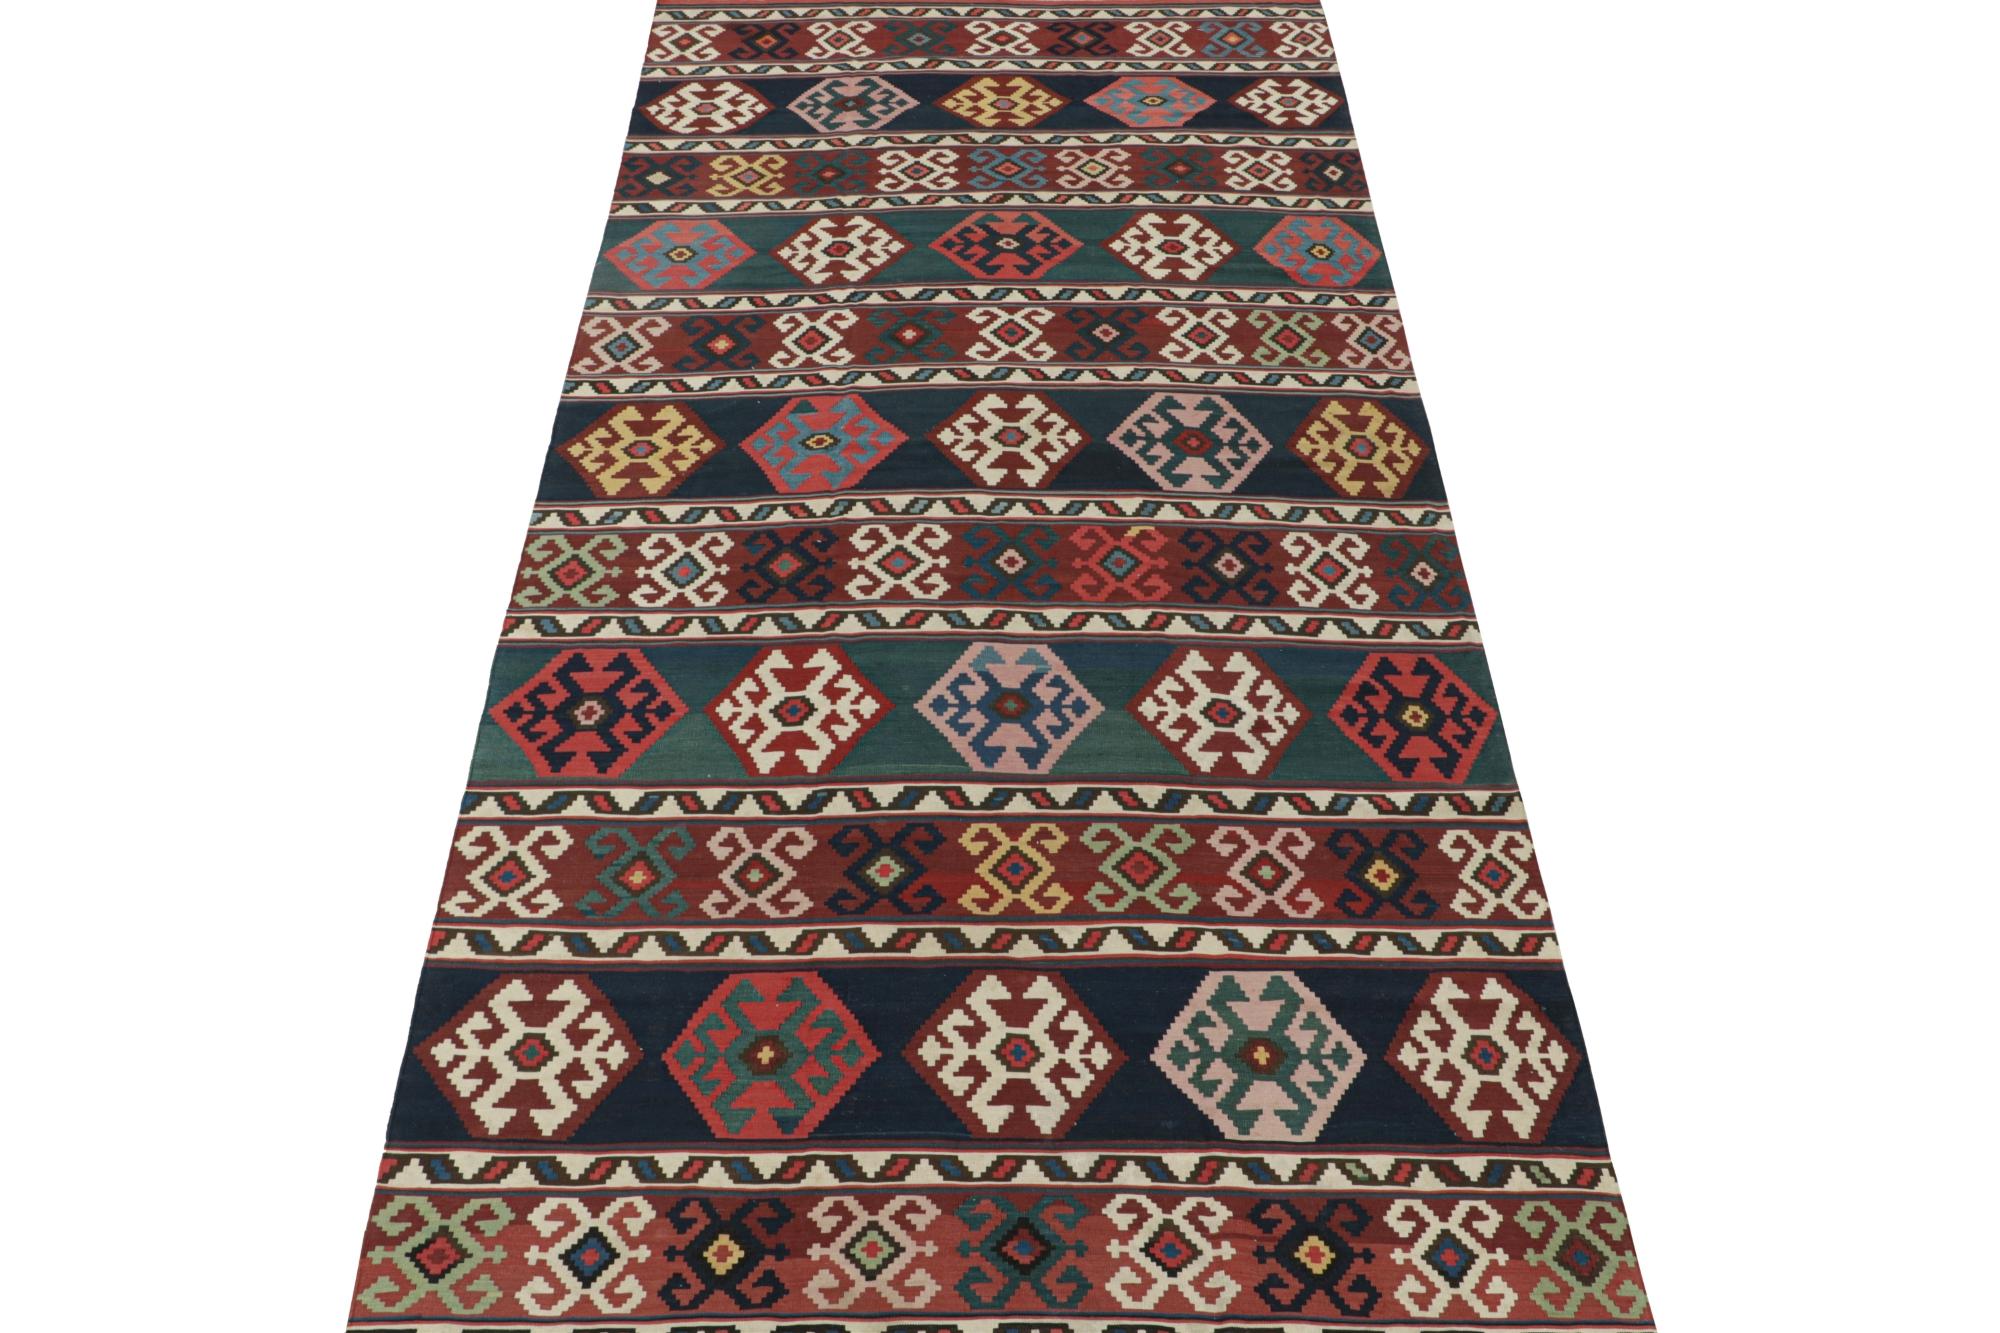 Hand-Woven Vintage Azerbaijan Persian Kilim with Geometric Patterns For Sale